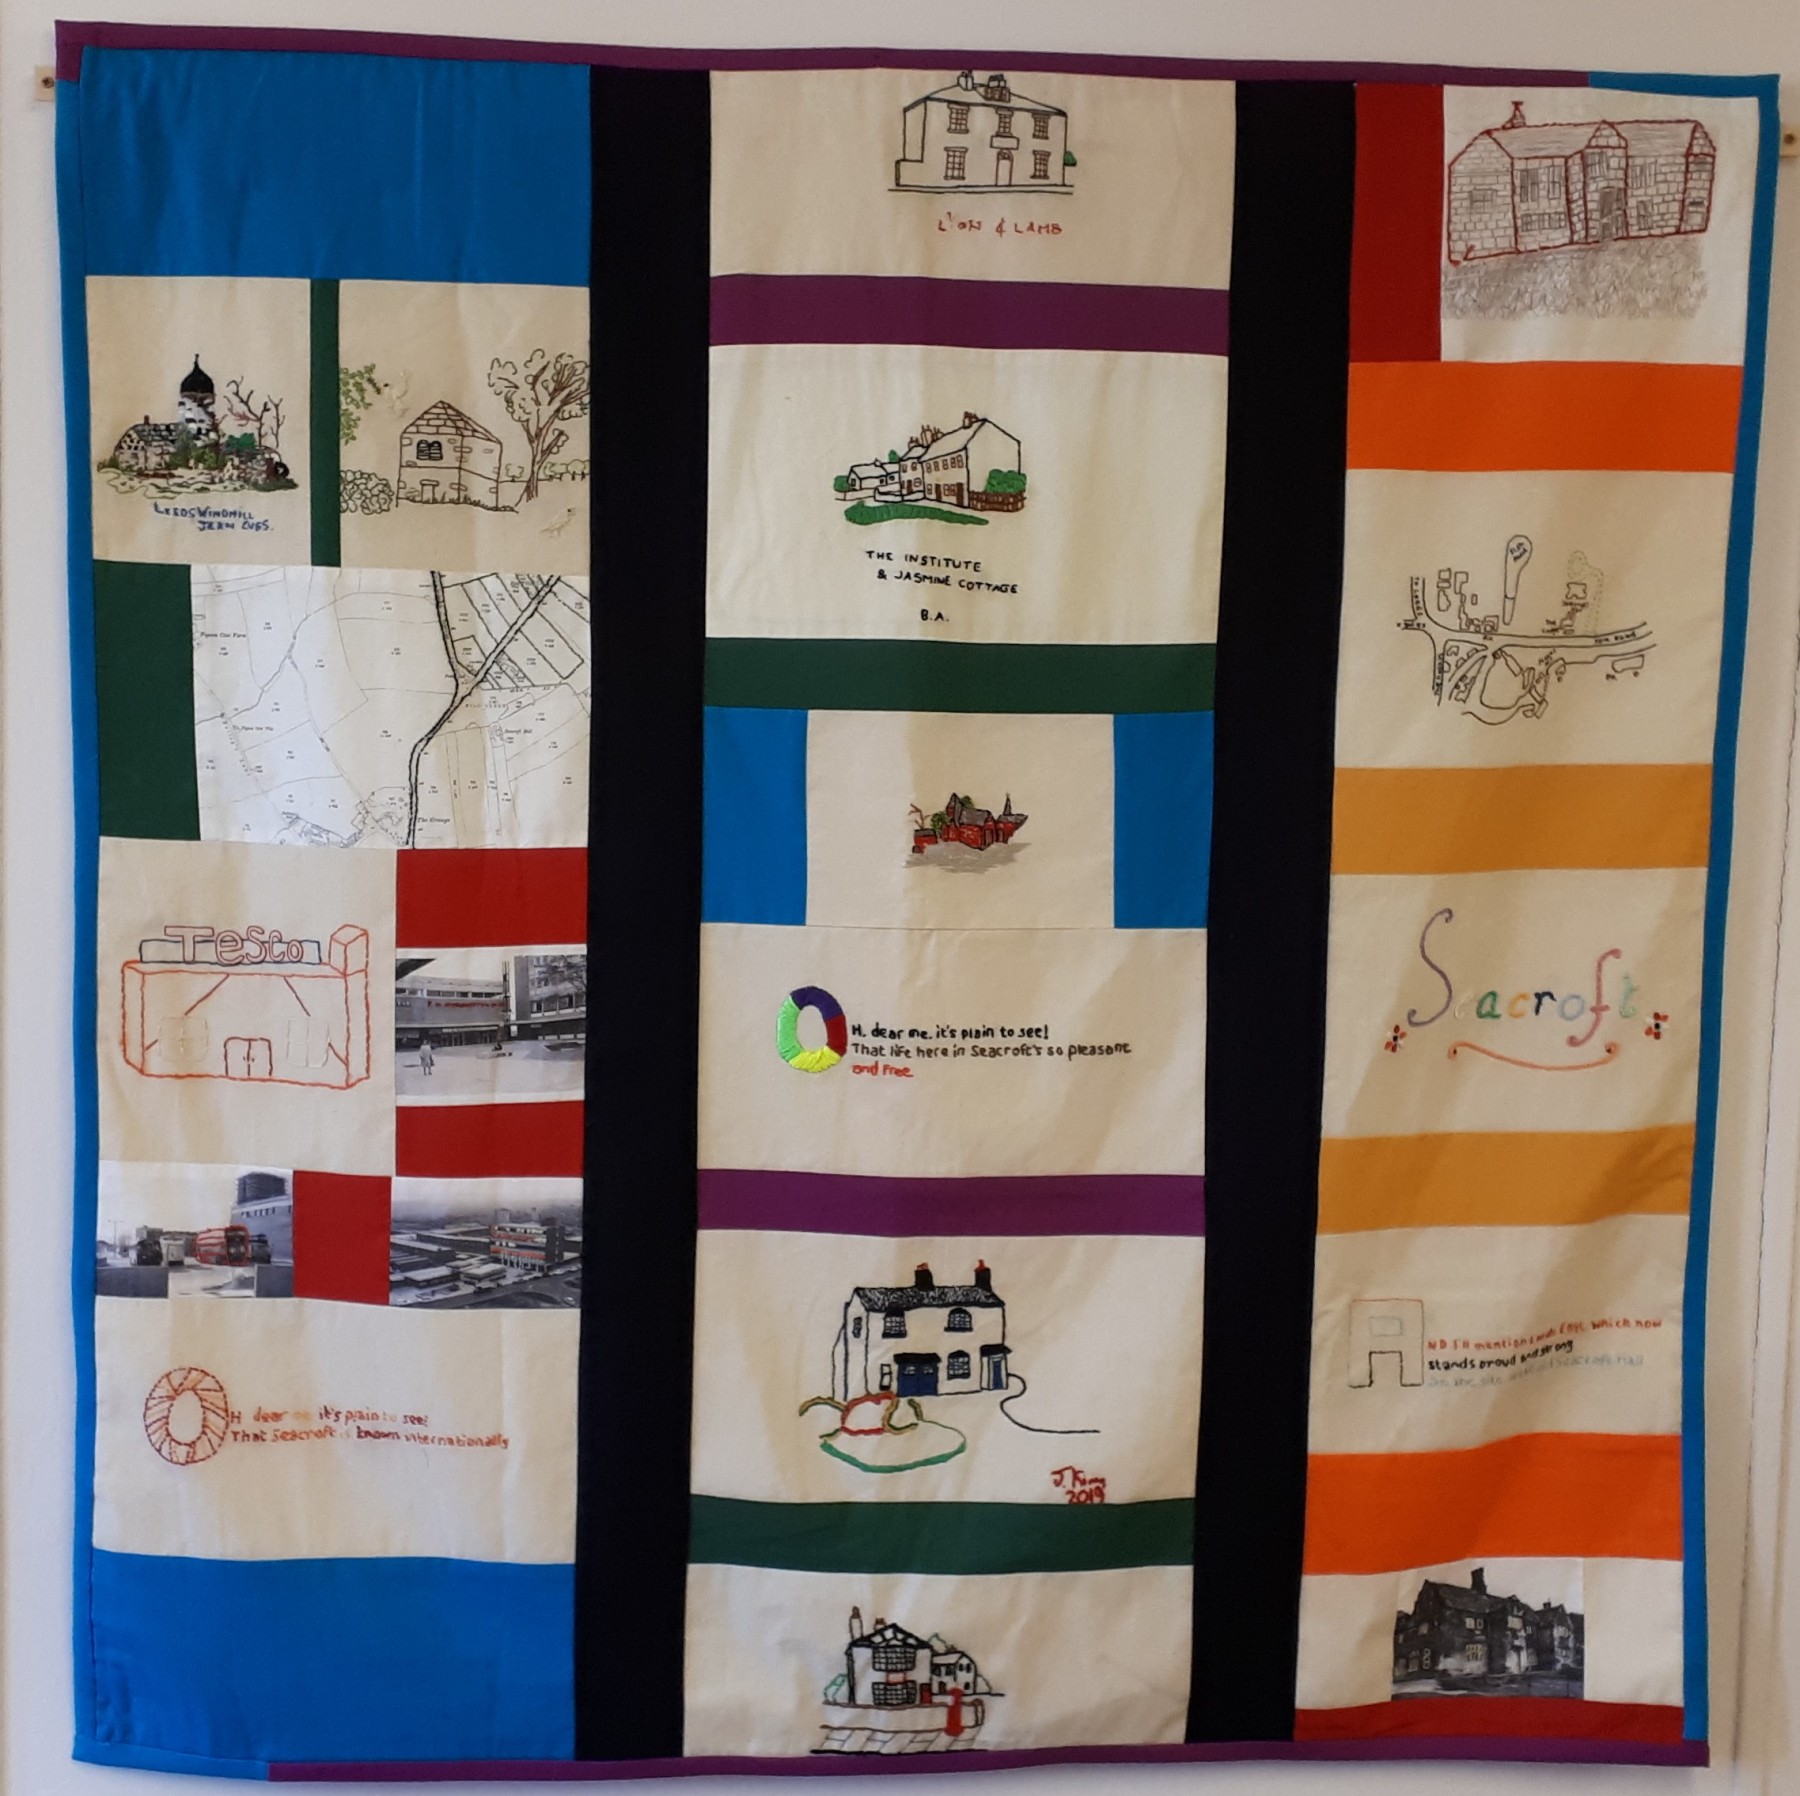 Map 18 – The Seacroft Tapestry